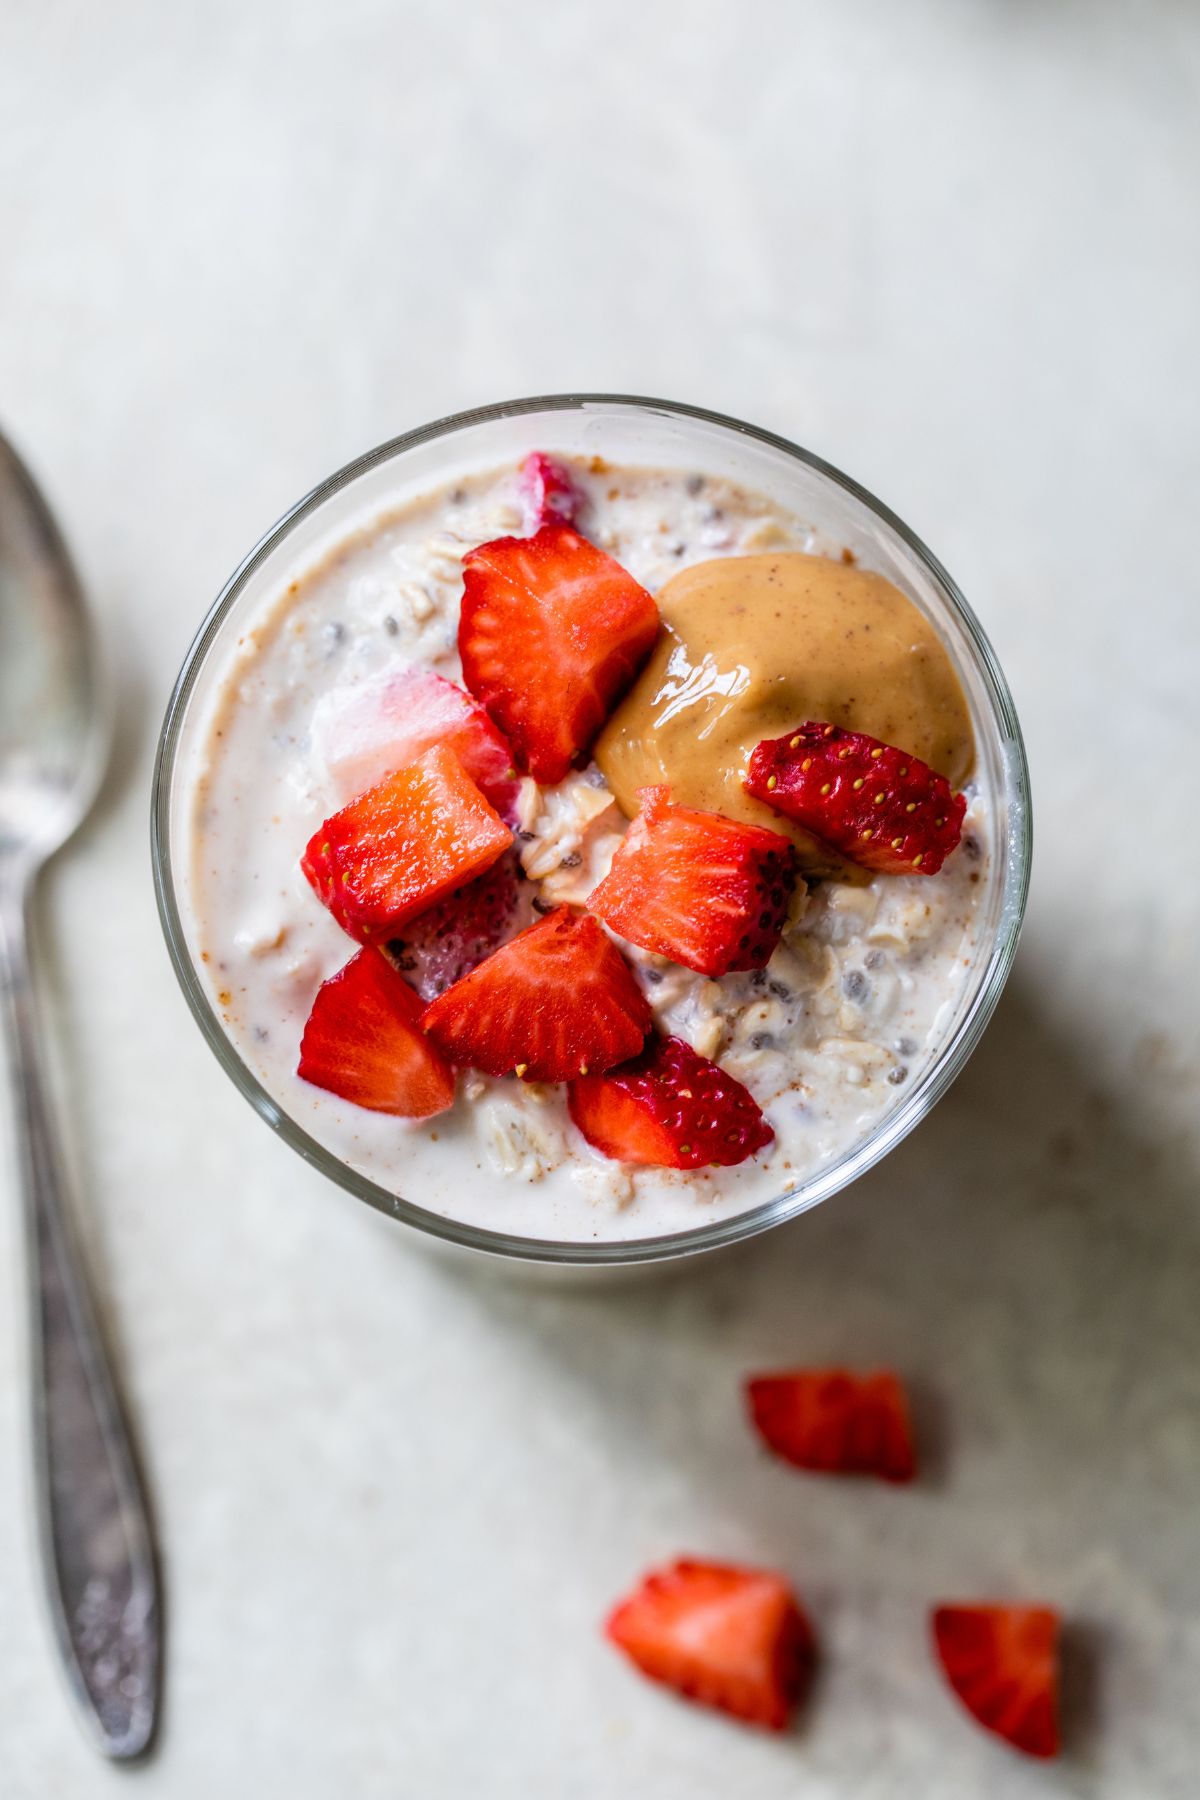 Top view of overnight oats topped with chopped strawberries and a dollop of peanut butter.